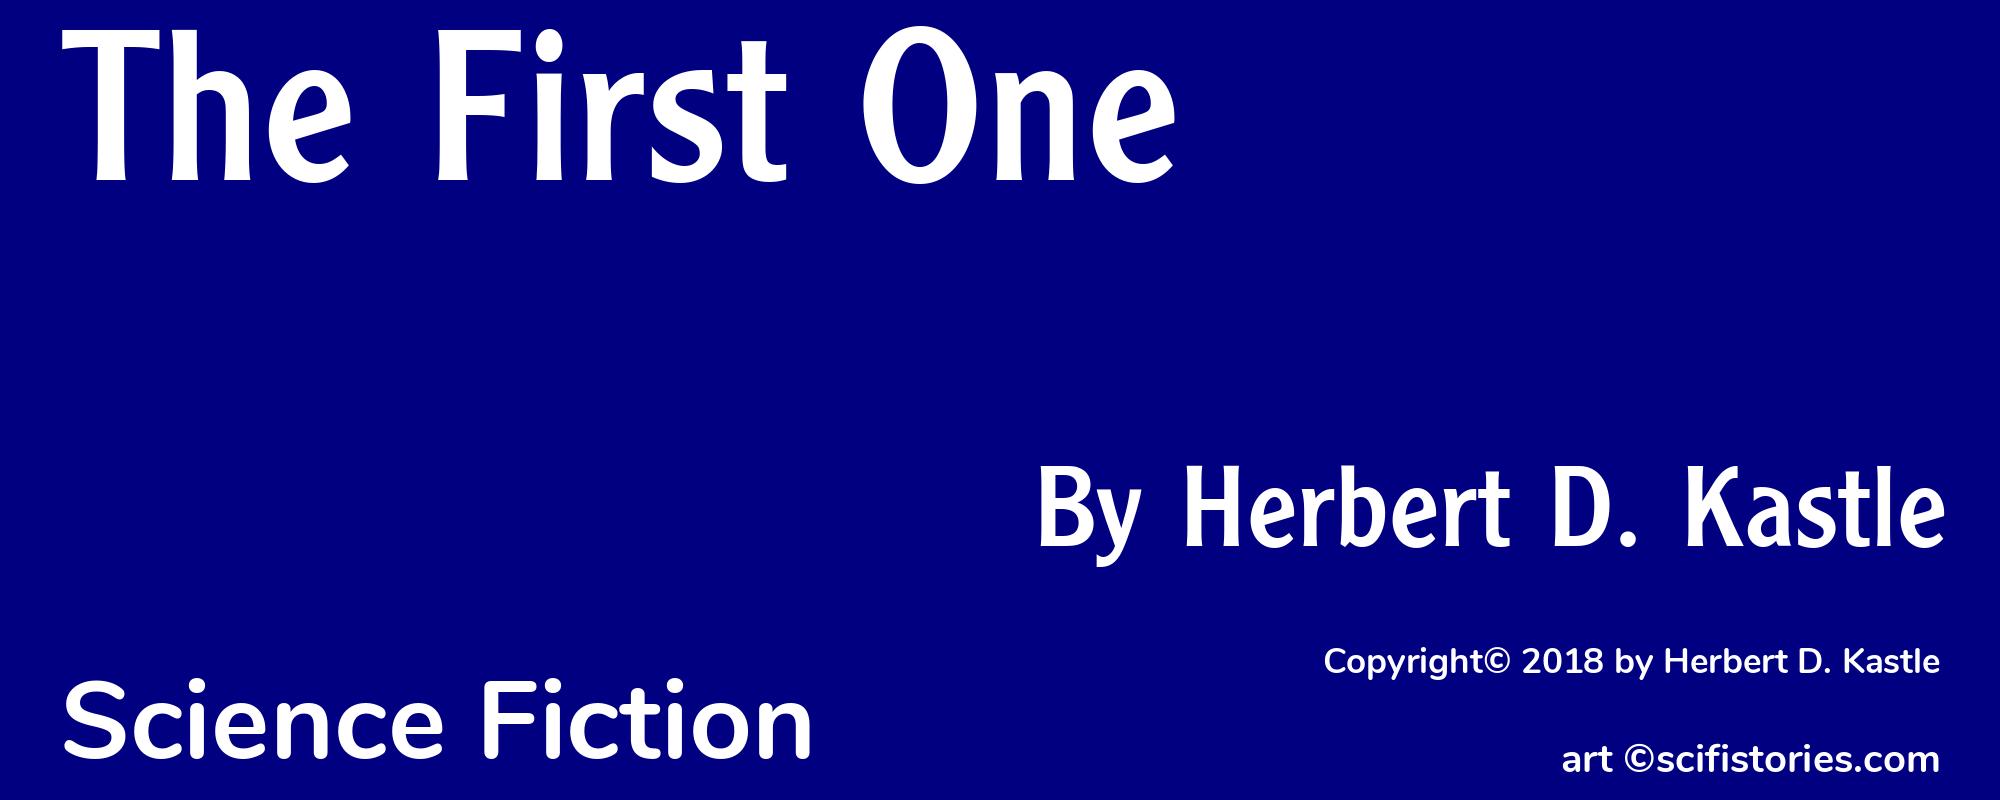 The First One - Cover